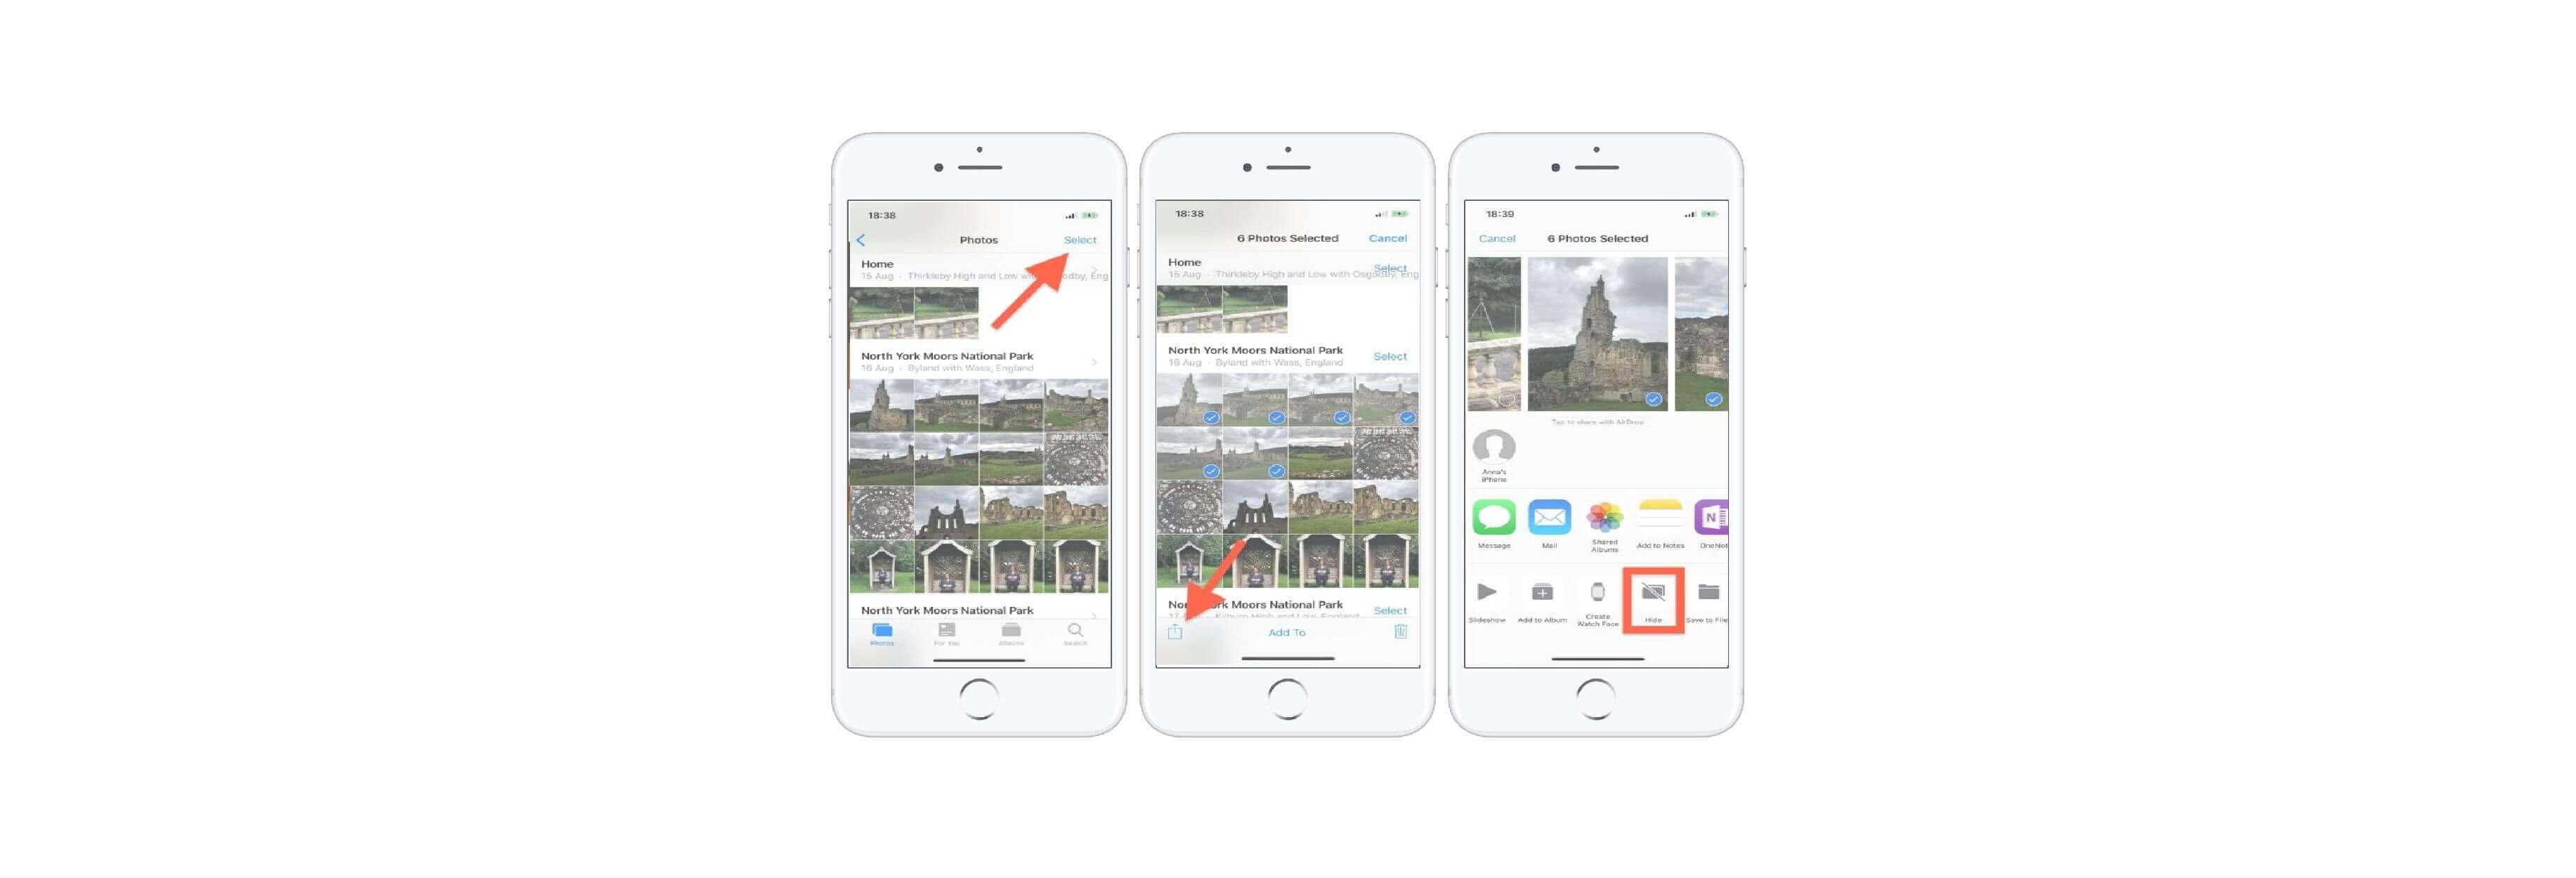 How to hide images in the Photos app on iPhone and iPad